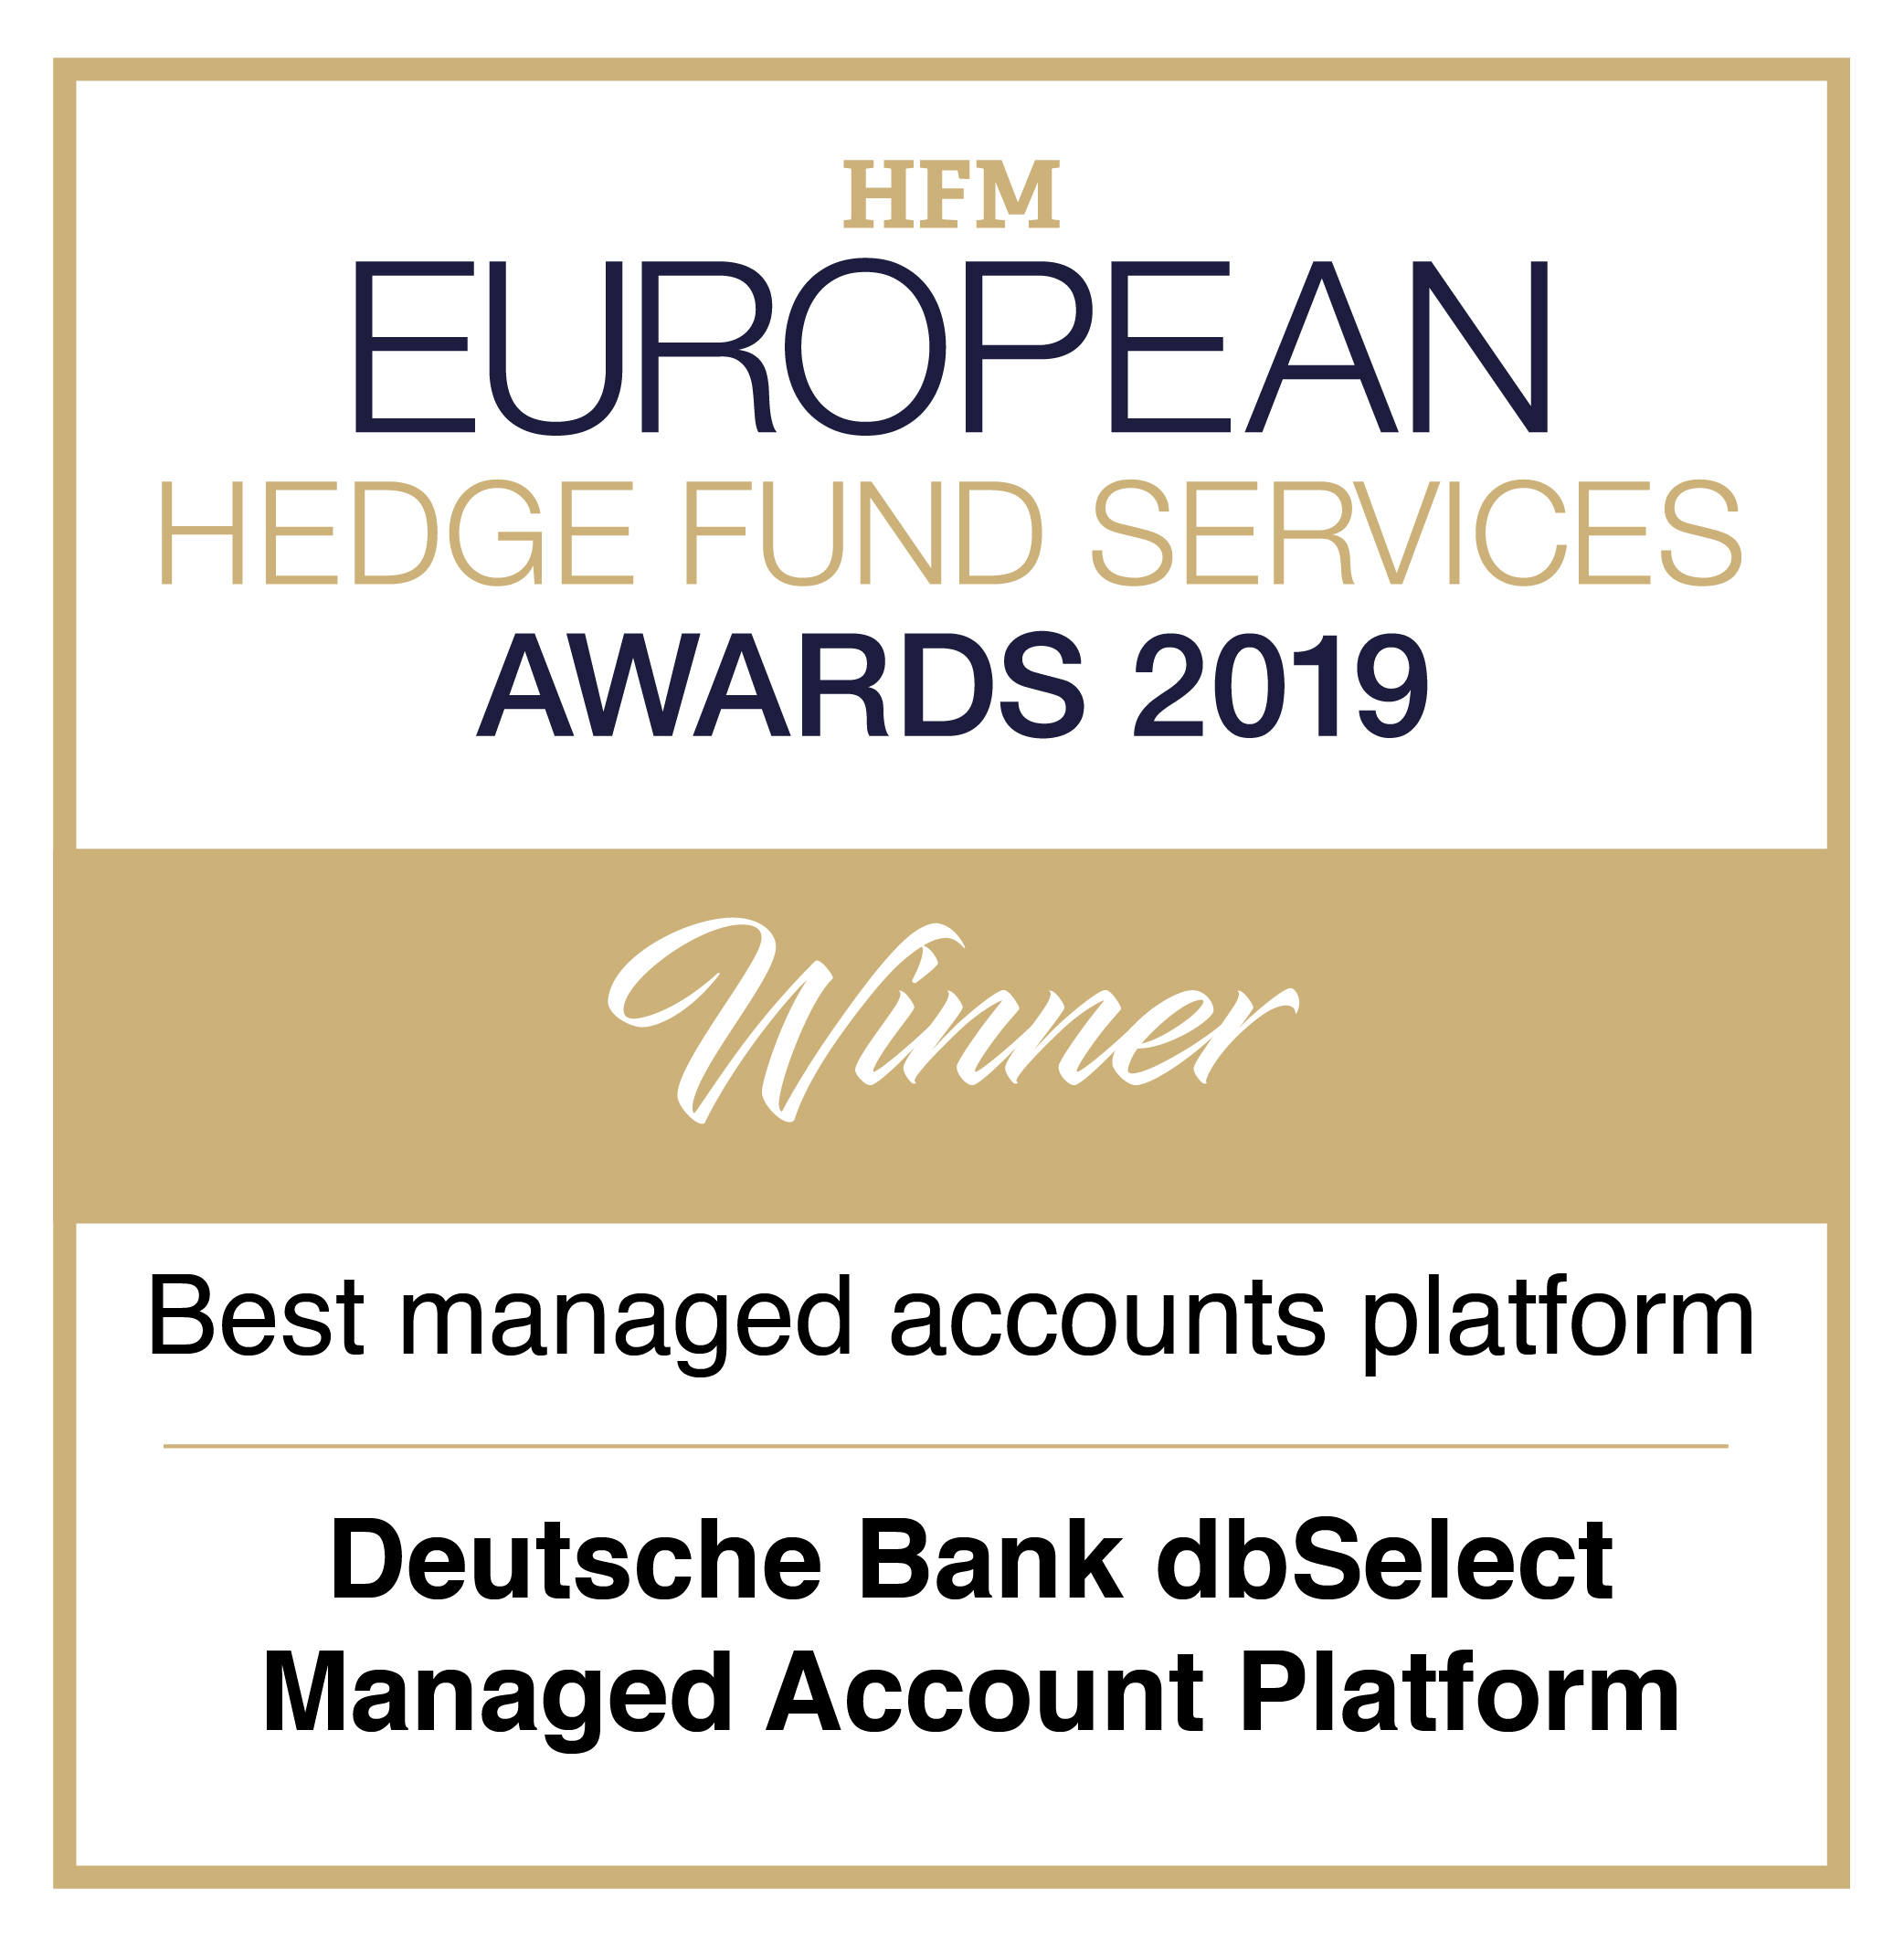 WINNER as a Best managed accounts platform by HFM European Hedge Fund Services Awards 2019